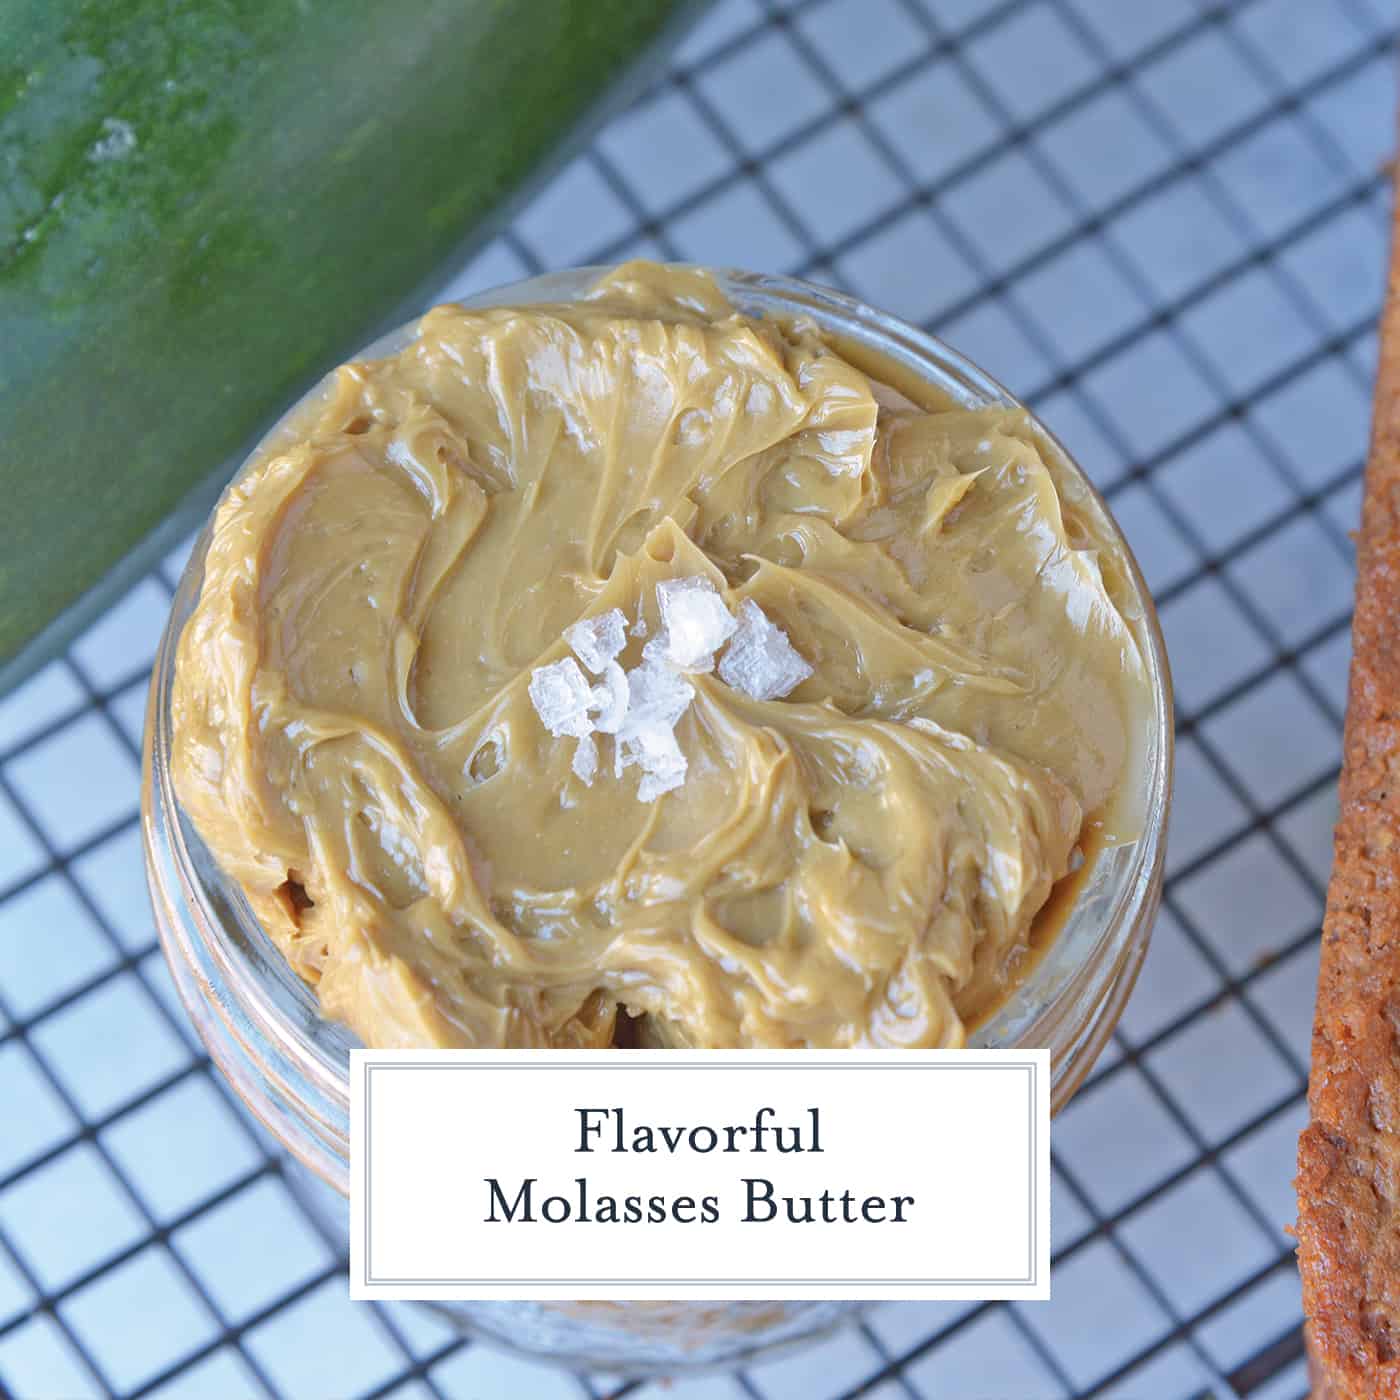 Molasses Butter is the blend of butter, molasses and one secret ingredient that will never guess until see the recipe! Served best on fresh zucchini bread and biscuits! #flavoredbutter #molassesbutter www.savoryexperiments.com 